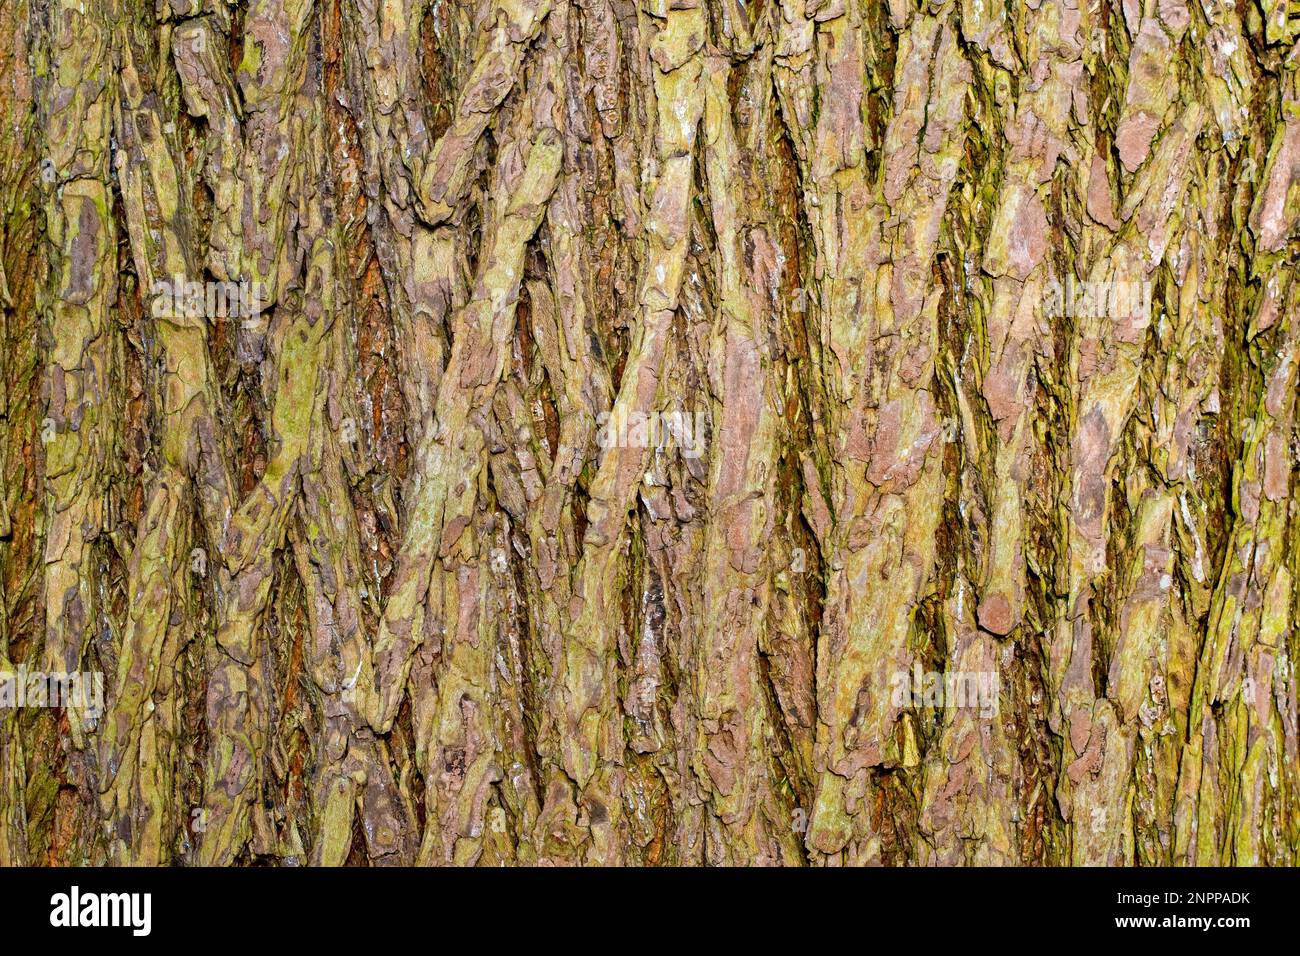 Wych Elm (ulmus glabra), close up showing the detail and textures in the bark of a mature tree. Stock Photo